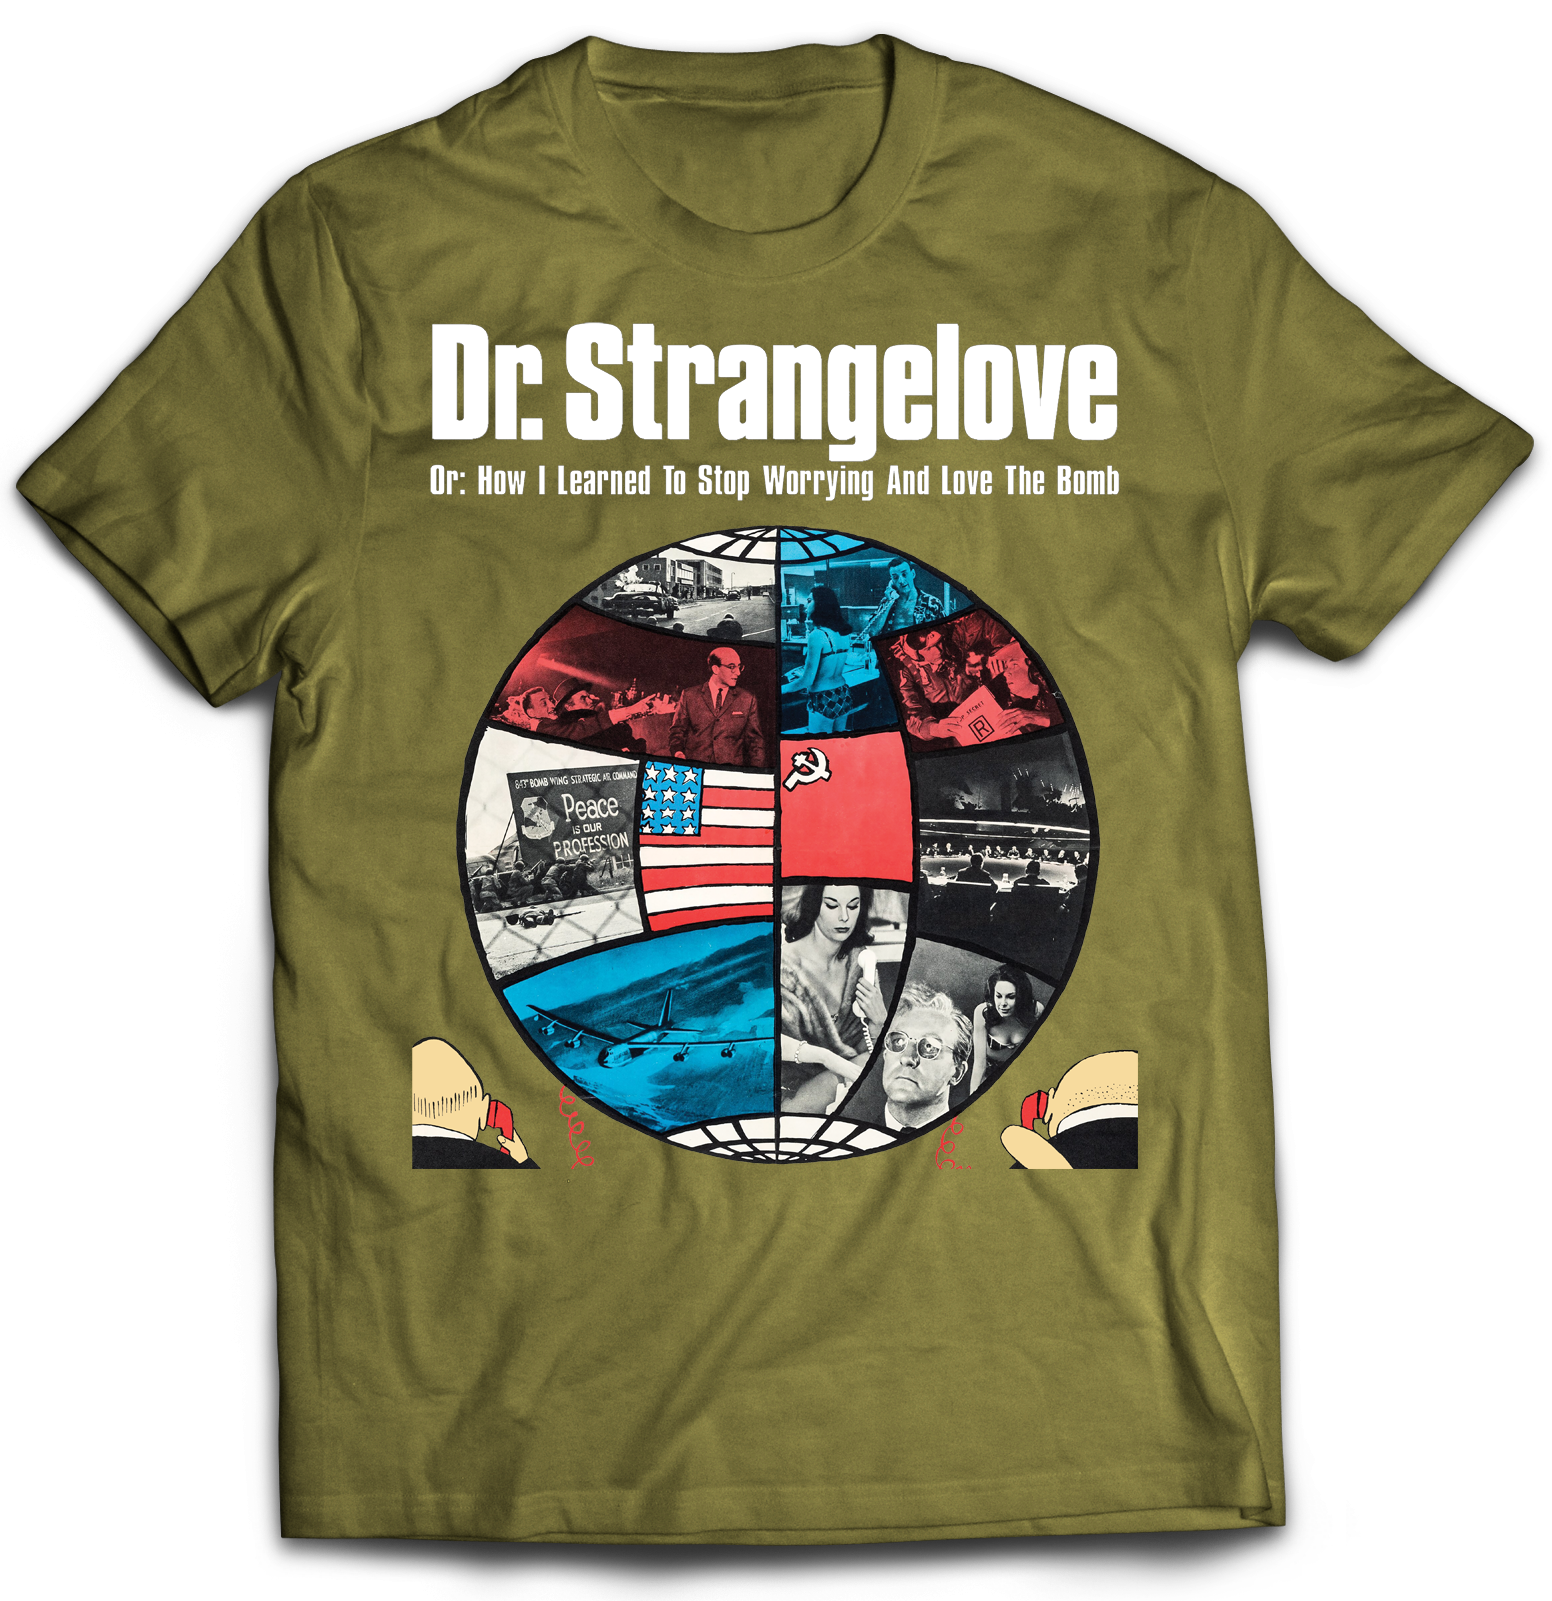 DR. STRANGELOVE, OR:  HOW I LEARNED TO STOP WORRYING AND LOVE THE BOMB - GLOBE T-SHIRT